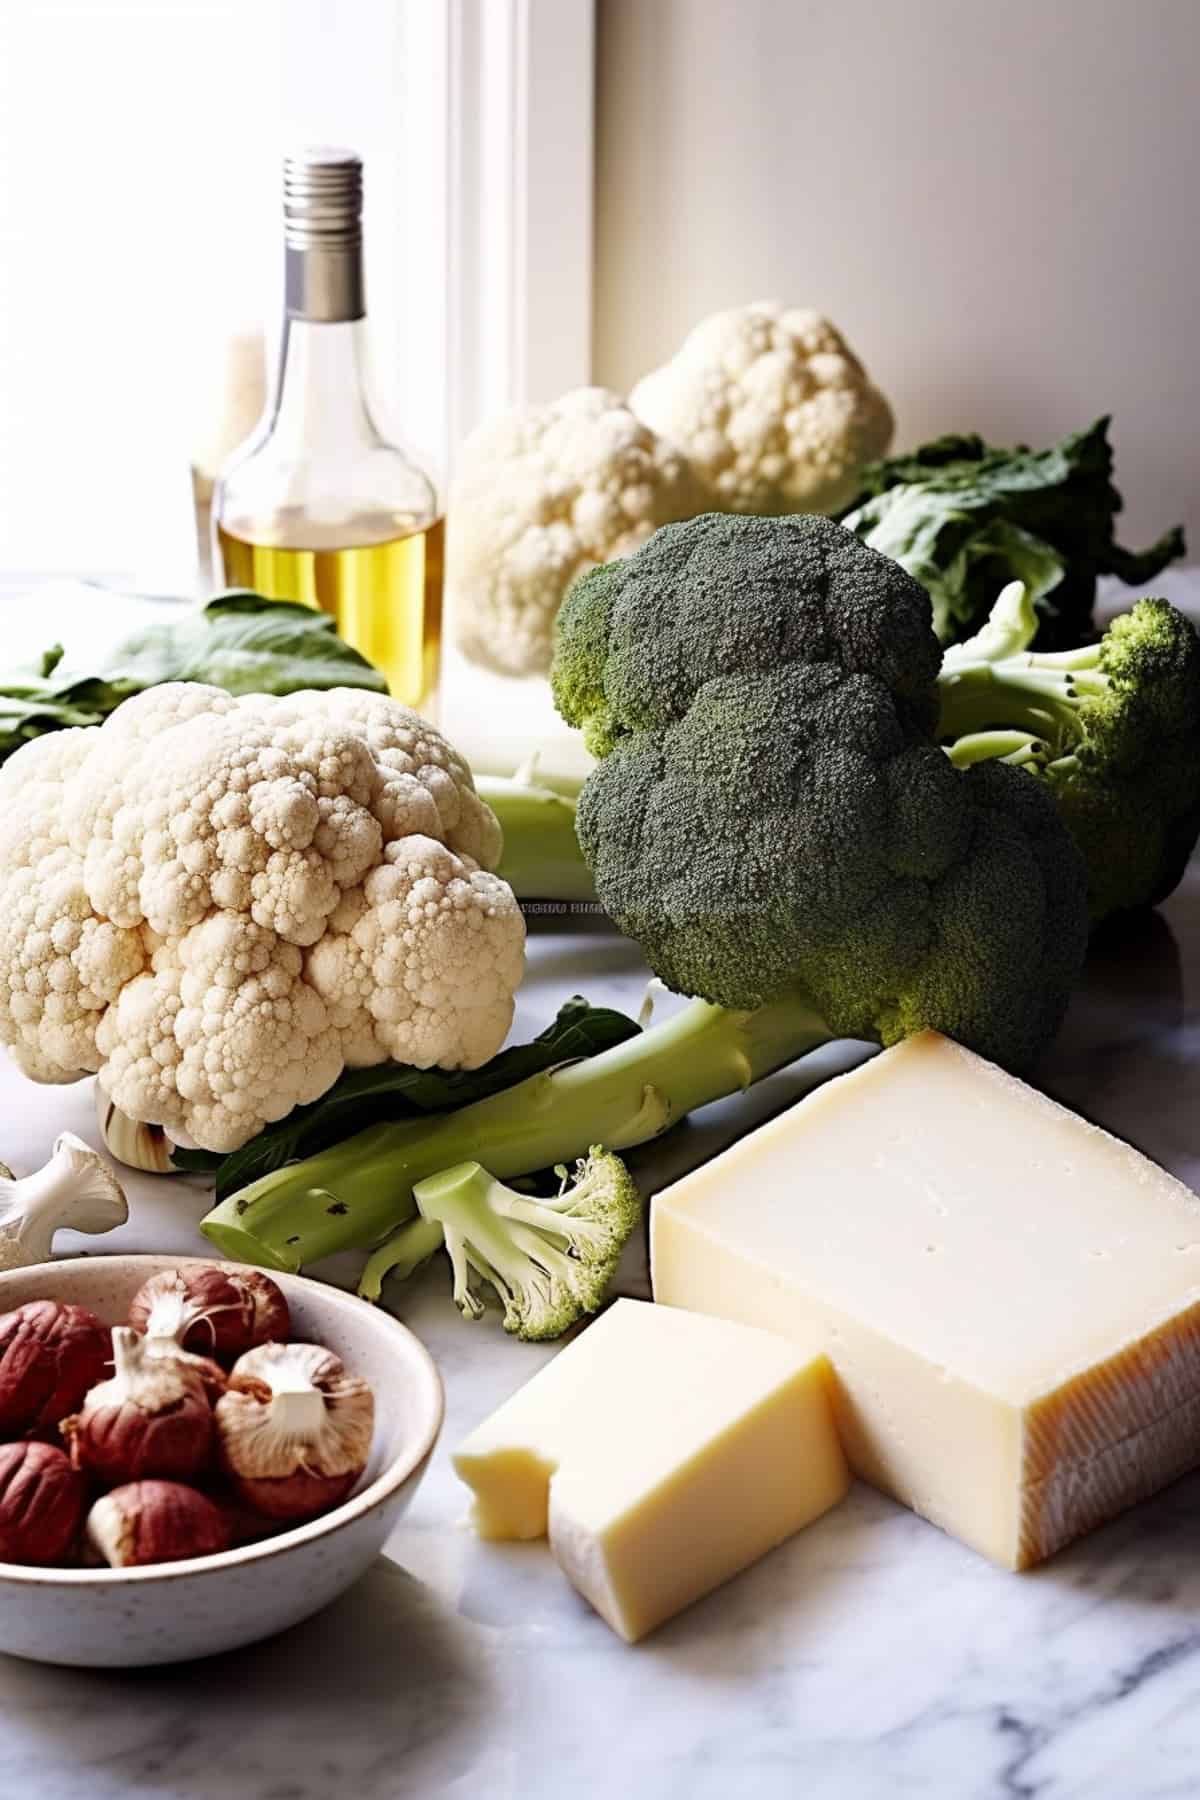 Ingredients for roasting broccoli and cauliflower.